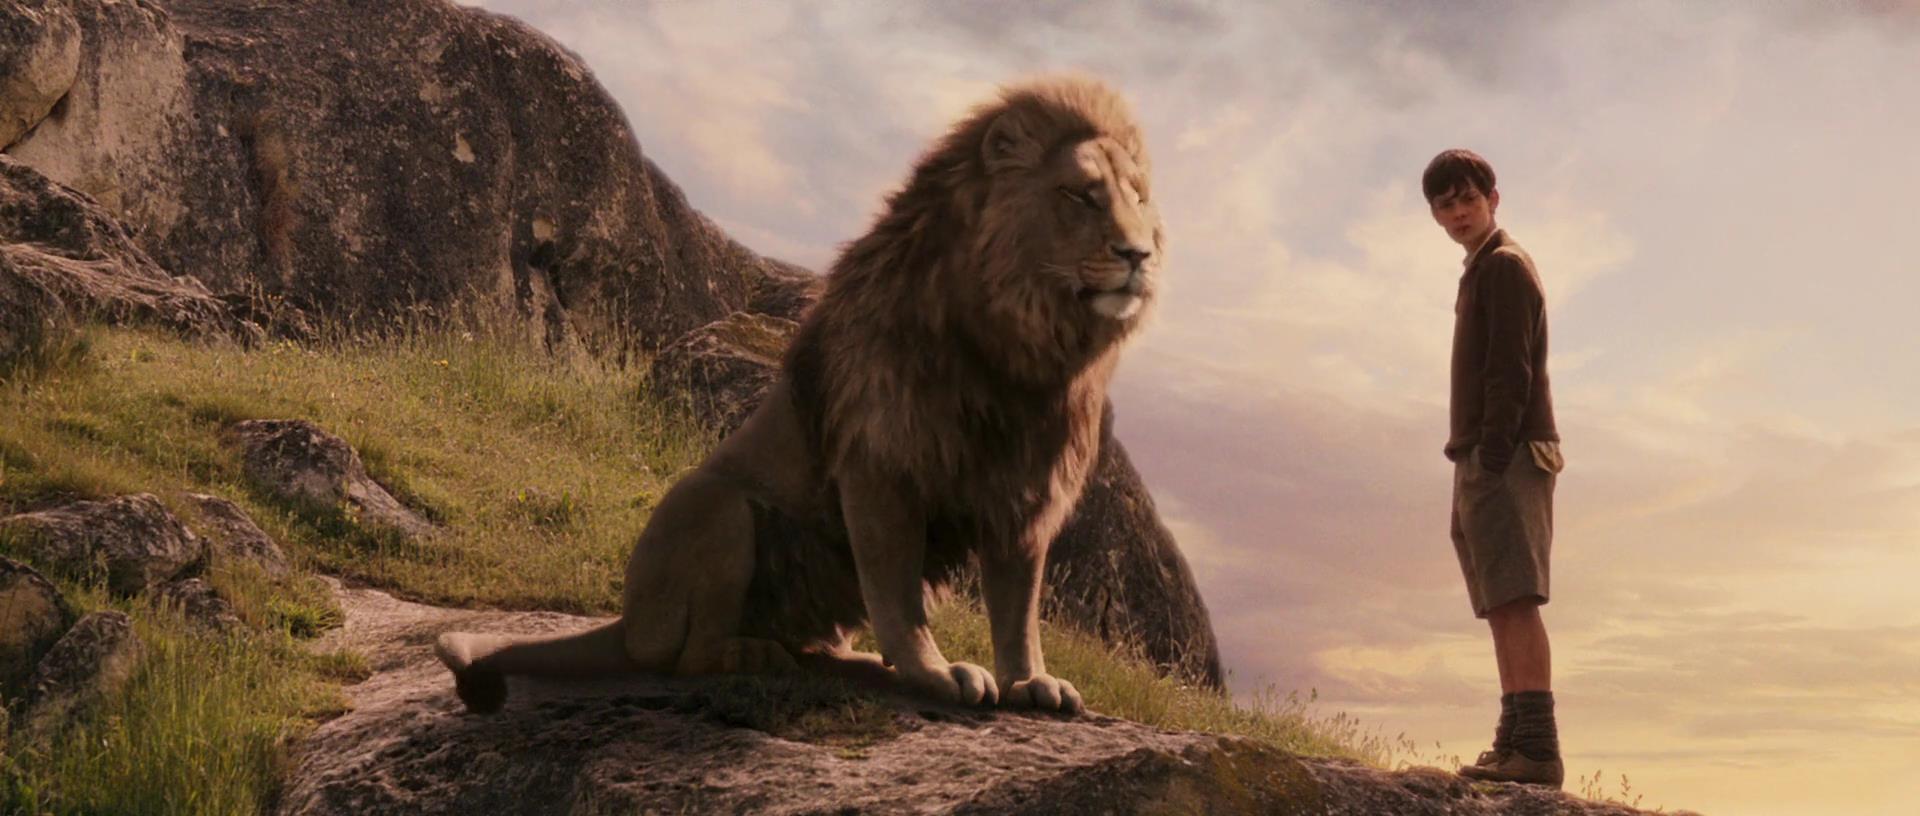 What did Aslan say to Edmund when he first met him in the first